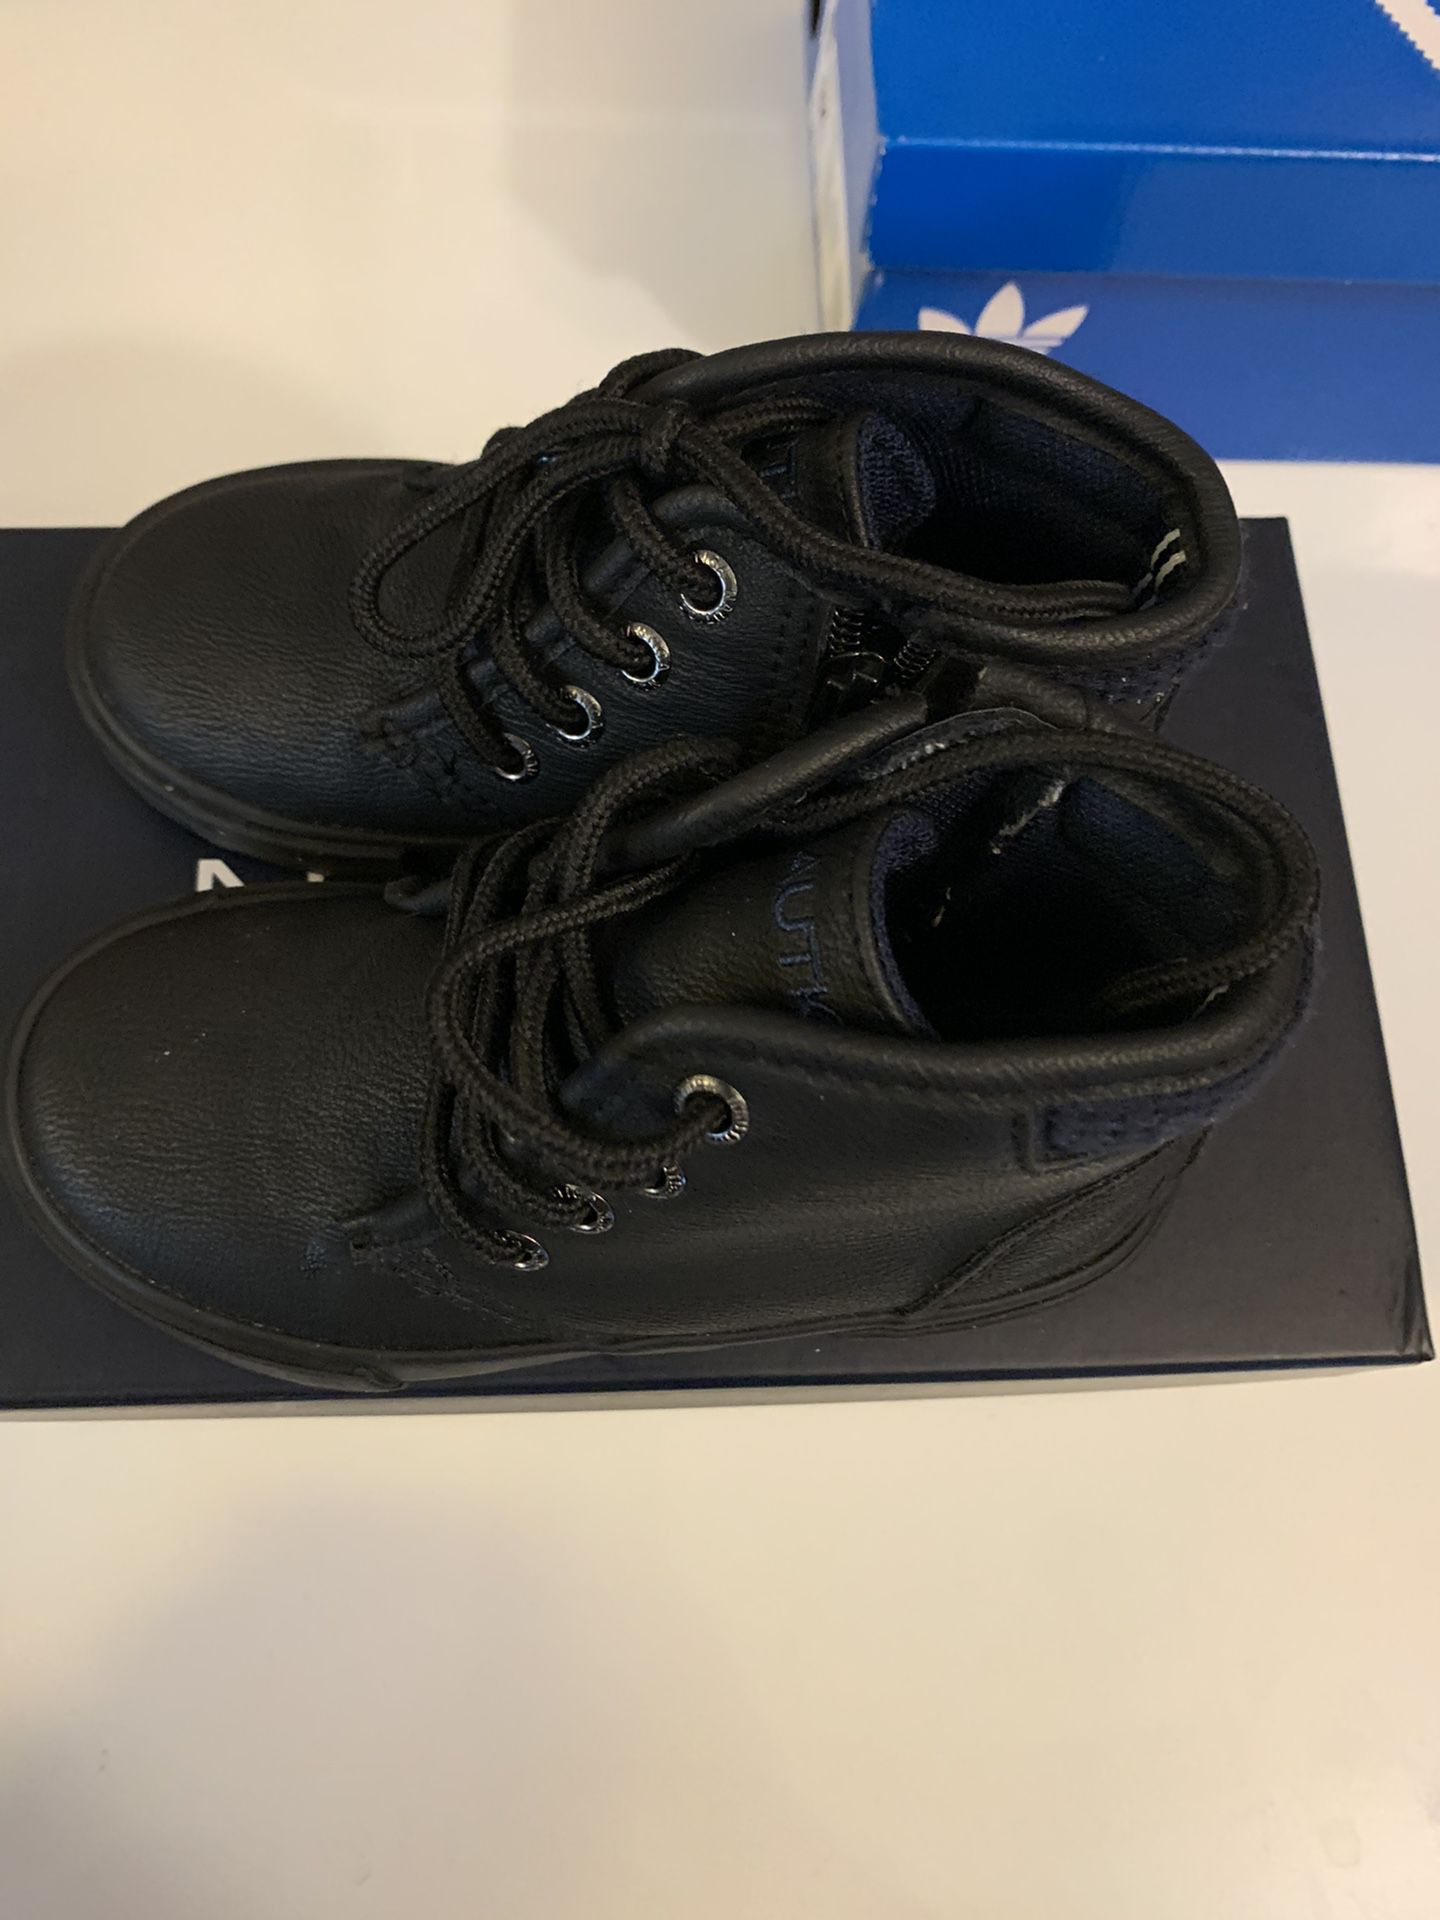 Nautica Boots- Toddler